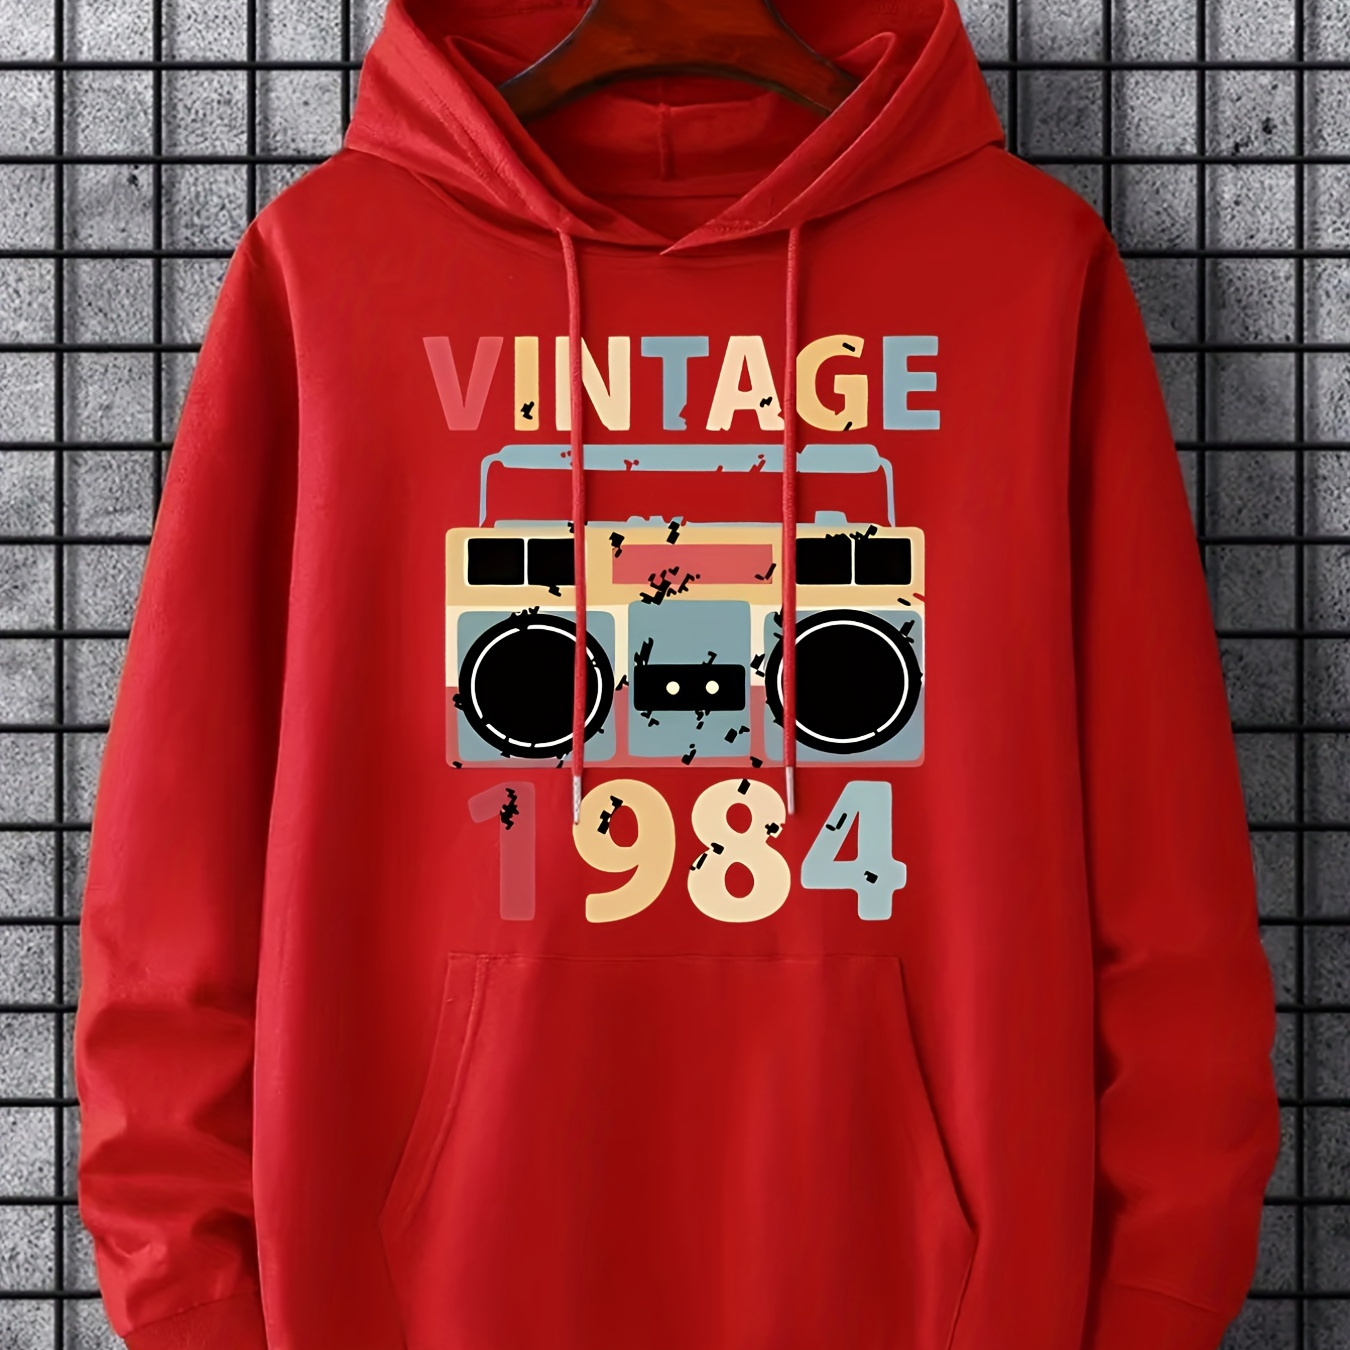 

Hoodies For Men, 'vintage' Retro Stereo Print Hoodie, Men’s Casual Pullover Hooded Sweatshirt With Kangaroo Pocket For Spring Fall, As Gifts